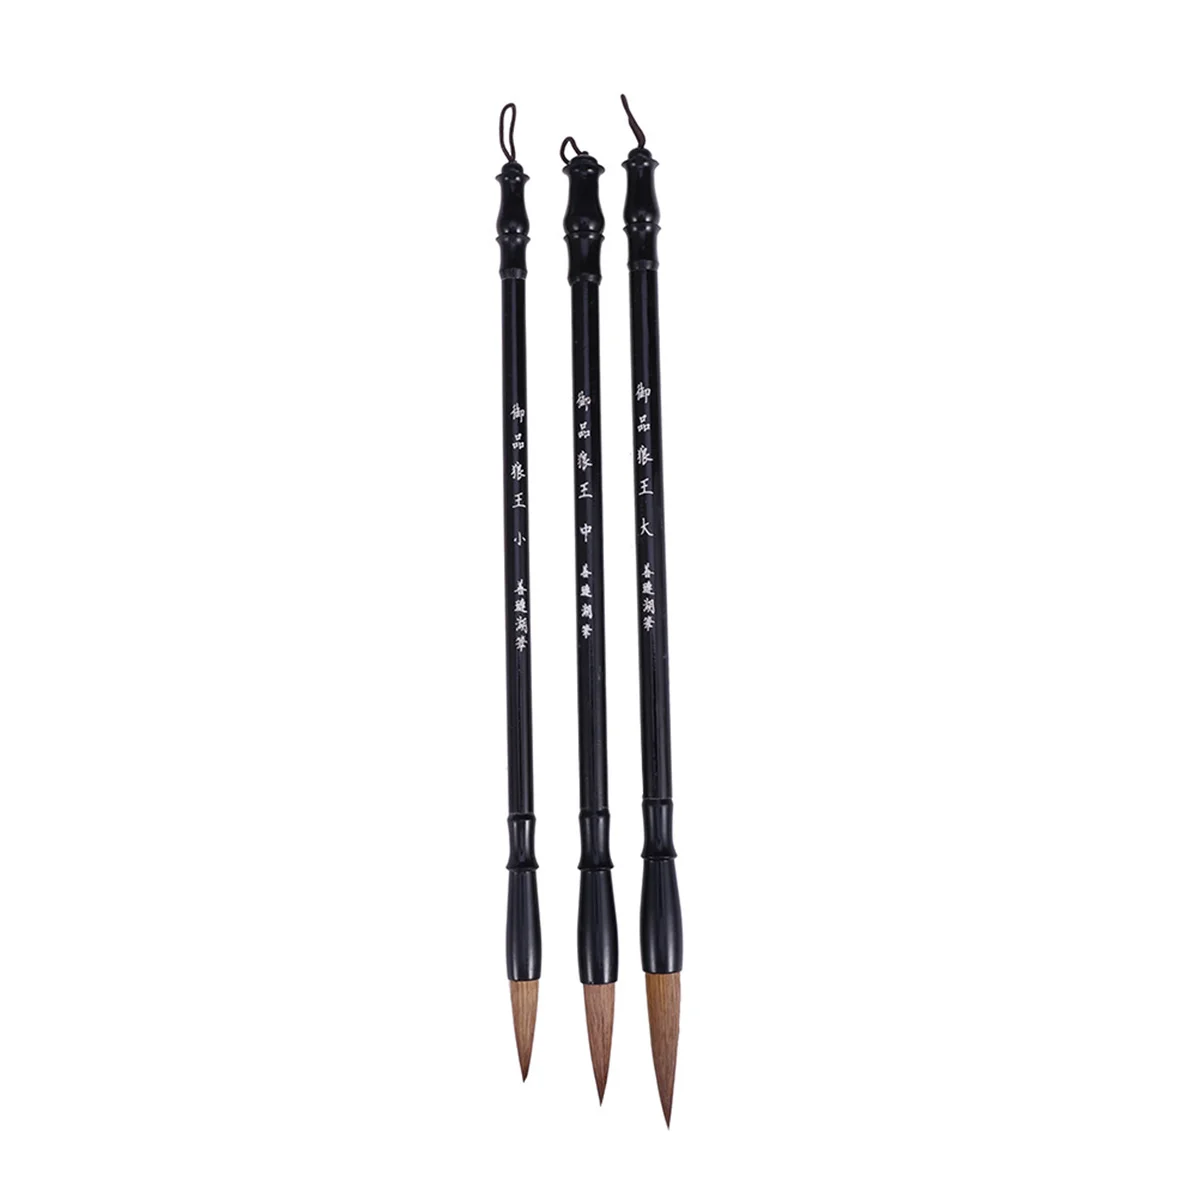 

3pcs Excellent Wolf Hair Chinese Caligraphy Kanji Japanese Sumi Drawing Brush - Size Large / Small / Medium (Black+Brown)